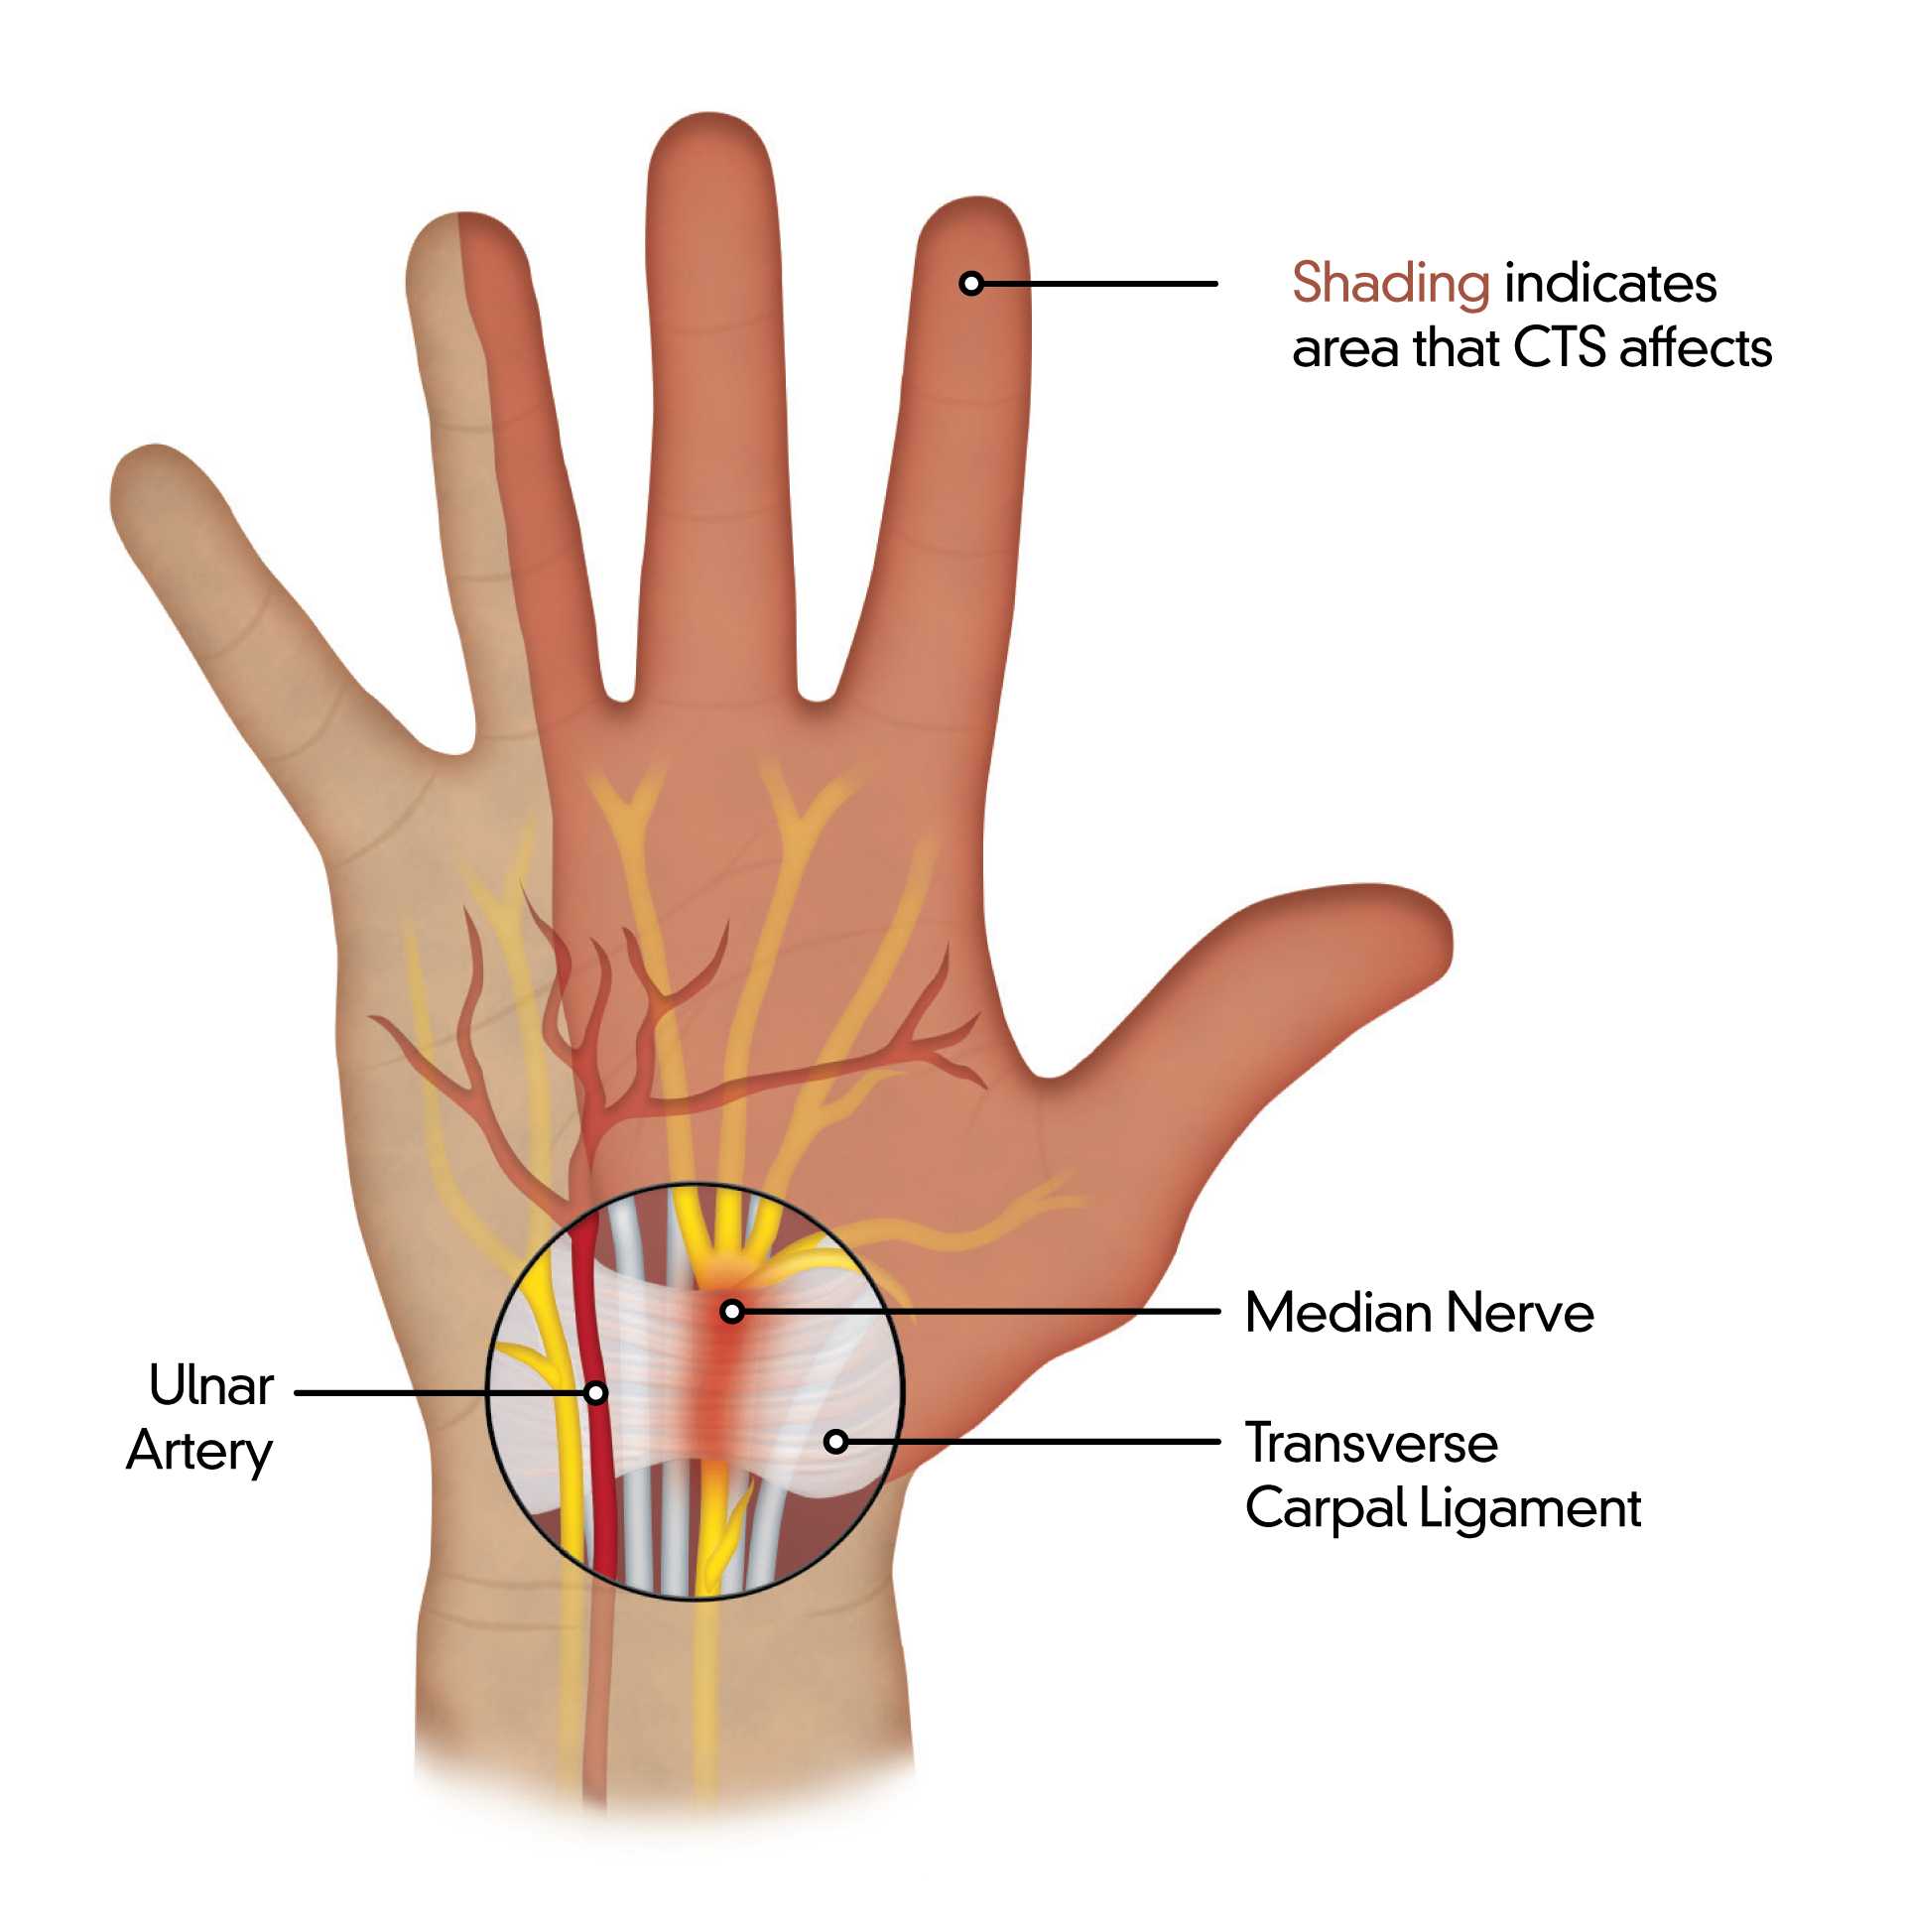 What Causes Hand Pain and Numbness? | Spine-health